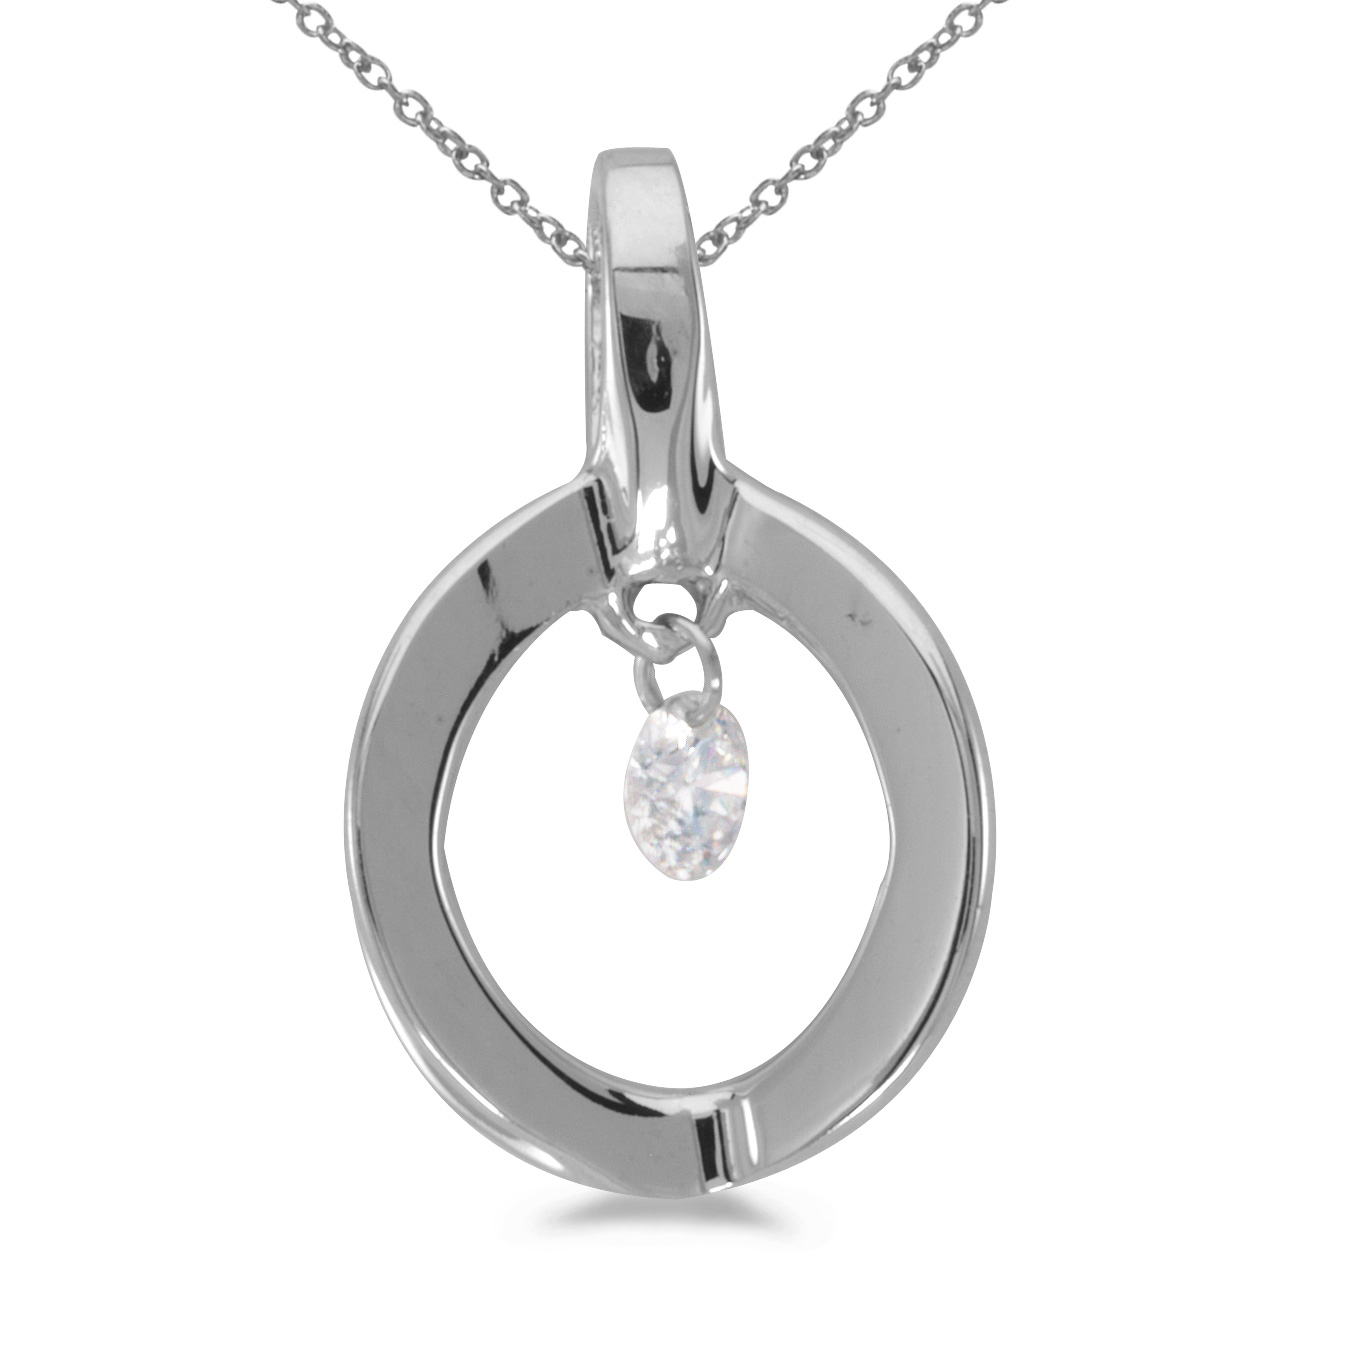 JCX2893: 14k gold Dashinng Diamonds pendant with 0.08 total ct diamonds. The center dangling diamond dances and shimmers with every heartbeat.